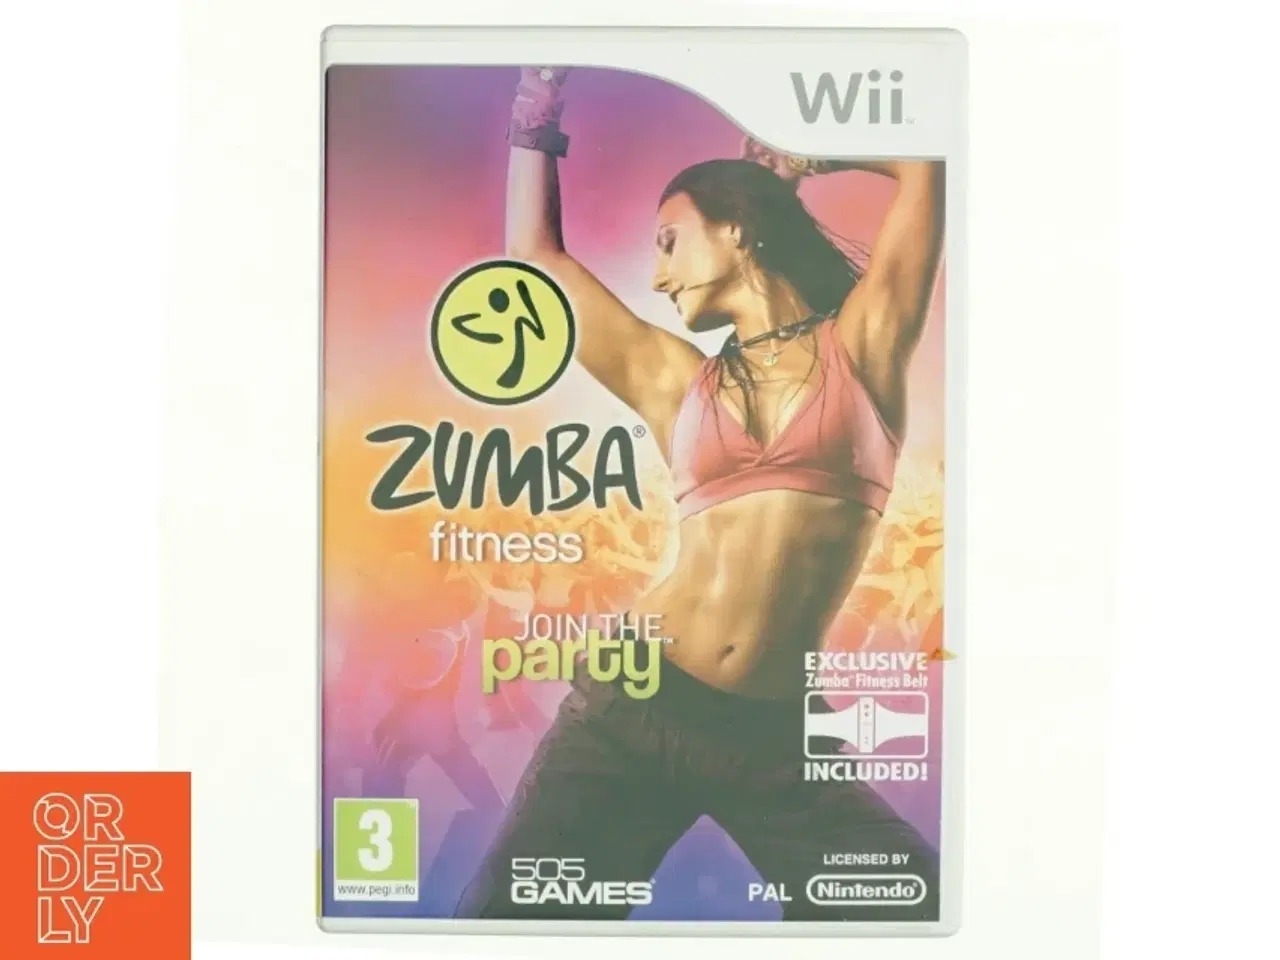 Billede 1 - Zumba join the party wii fra Wii